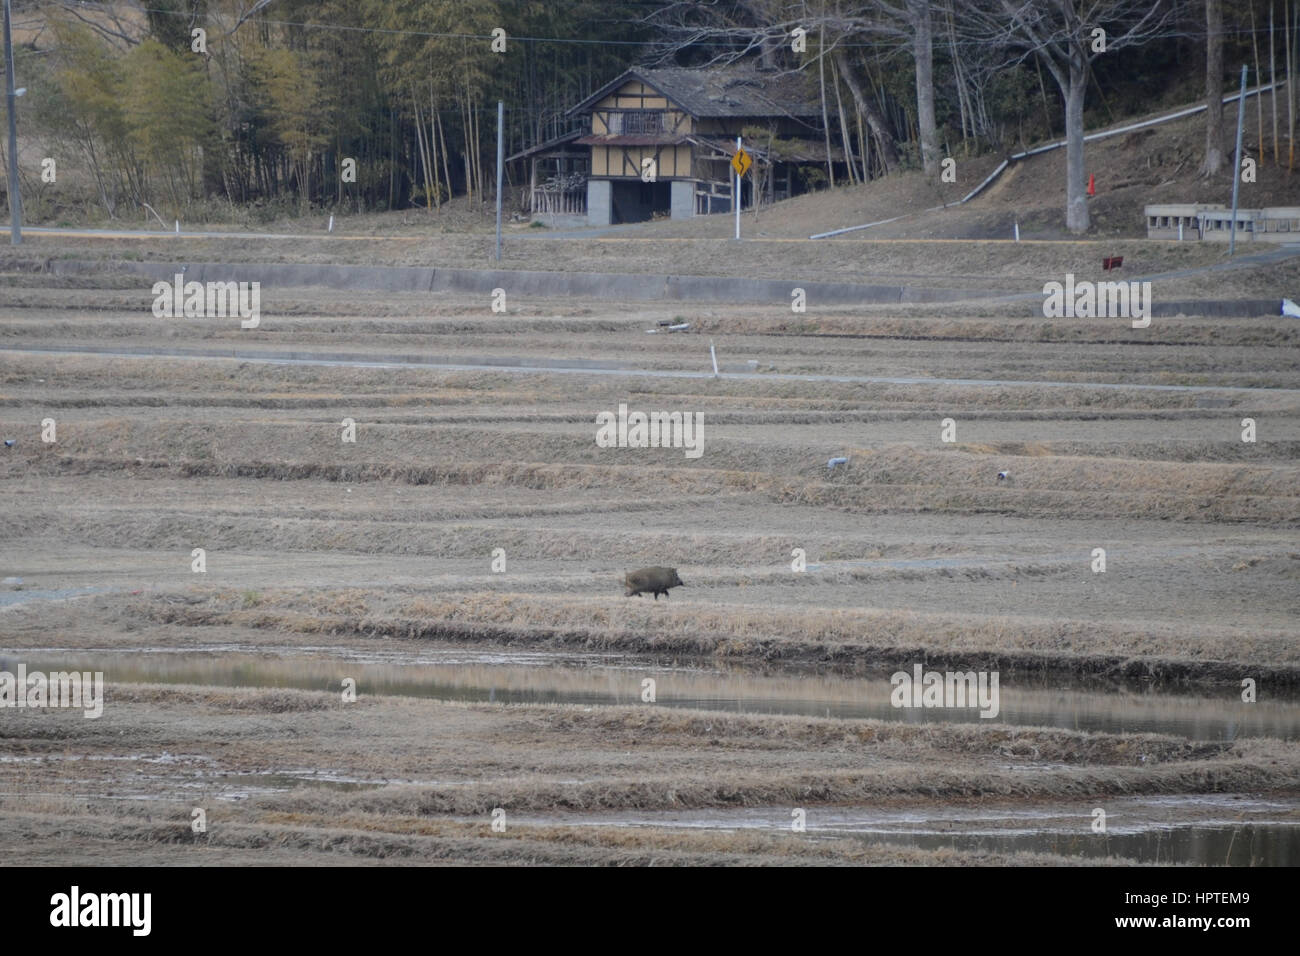 (170225) -- FUKUSHIMA(JAPAN), Feb. 25, 2017 (Xinhua) -- Photo taken on Feb. 22, 2017 shows a wild boar in the field at Naraha, Fukushima Prefecture, Japan. A magnitude-9.0 earthquake in 2011 triggered a massive tsunami which destroyed the emergency power and then the cooling system of Fukushima Daiichi nuclear power plant, and caused a serious nuclear disaster, forcing some 300,000 people to evacuate. Almost six years later, the nuclear nightmare still continues in that part of Japan. (Xinhua/Hua Yi)(yk) Stock Photo